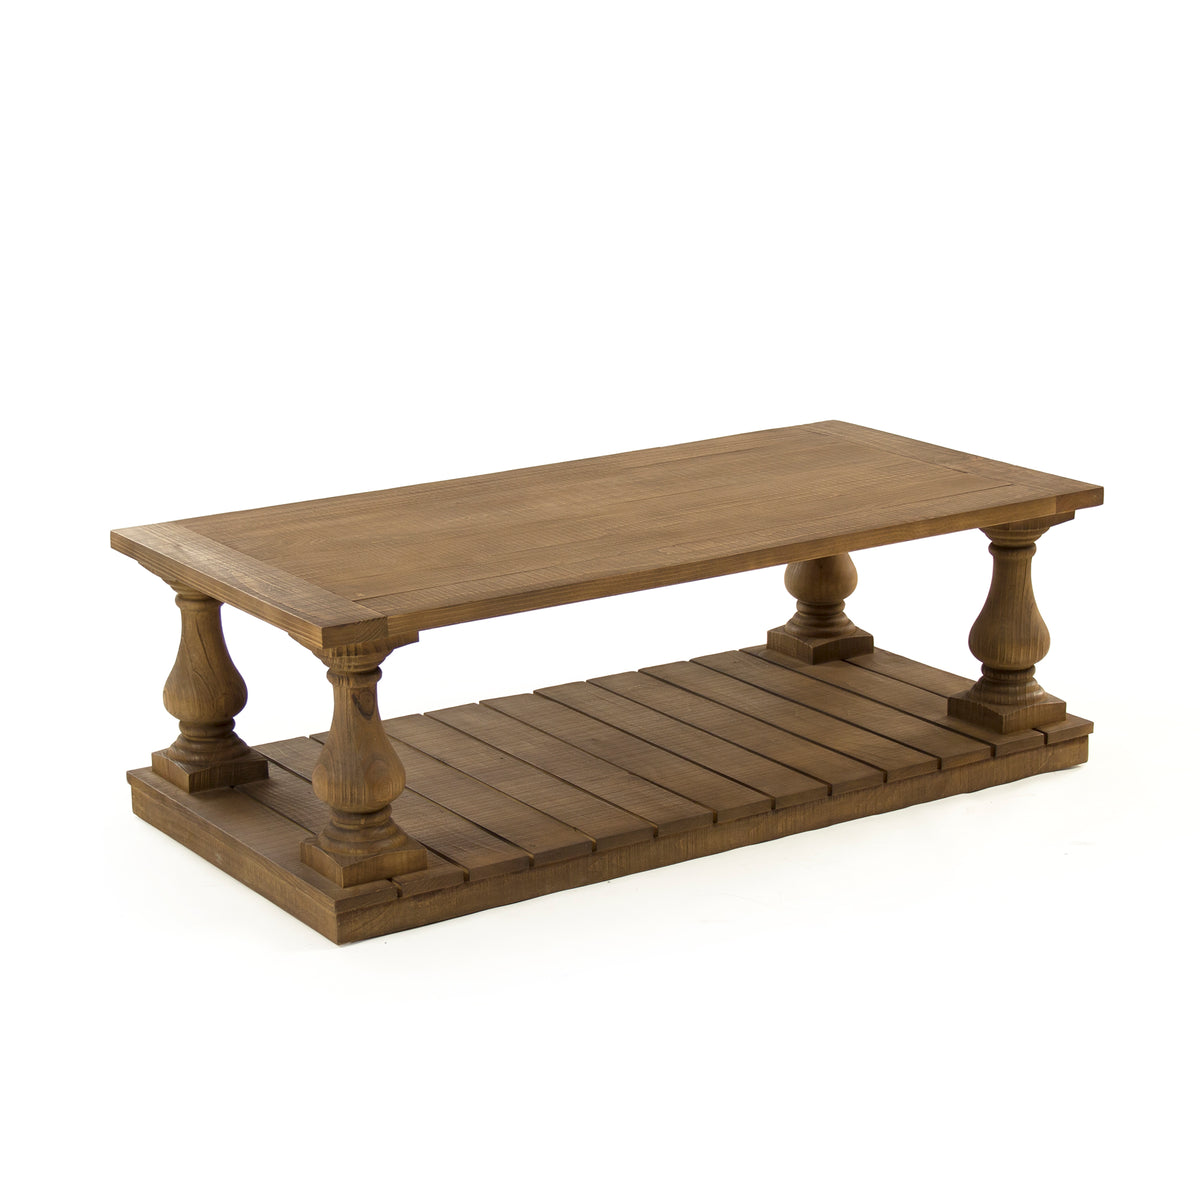 Bellamy Coffee Table by Zentique